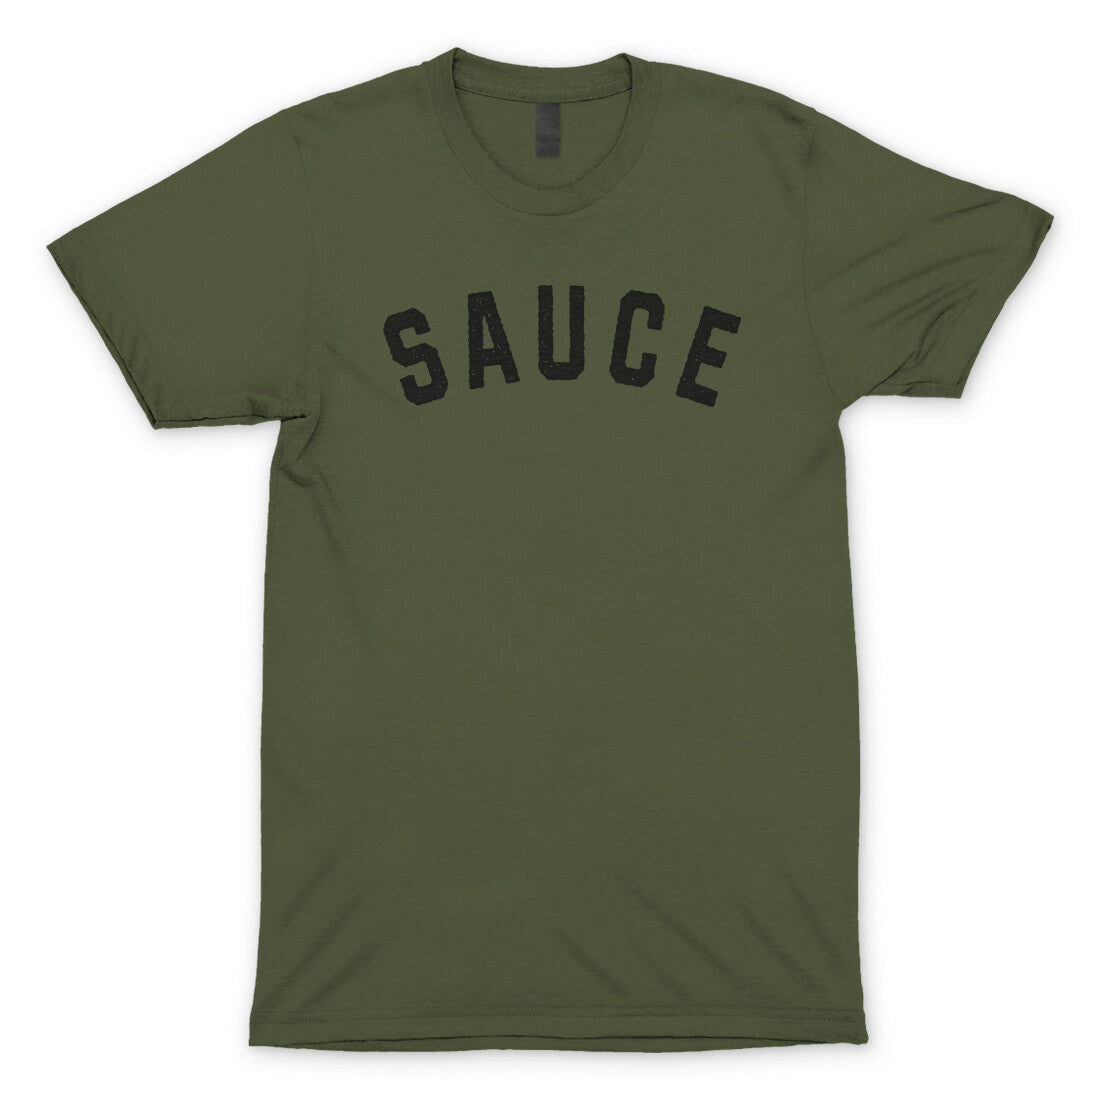 Sauce in Military Green Color